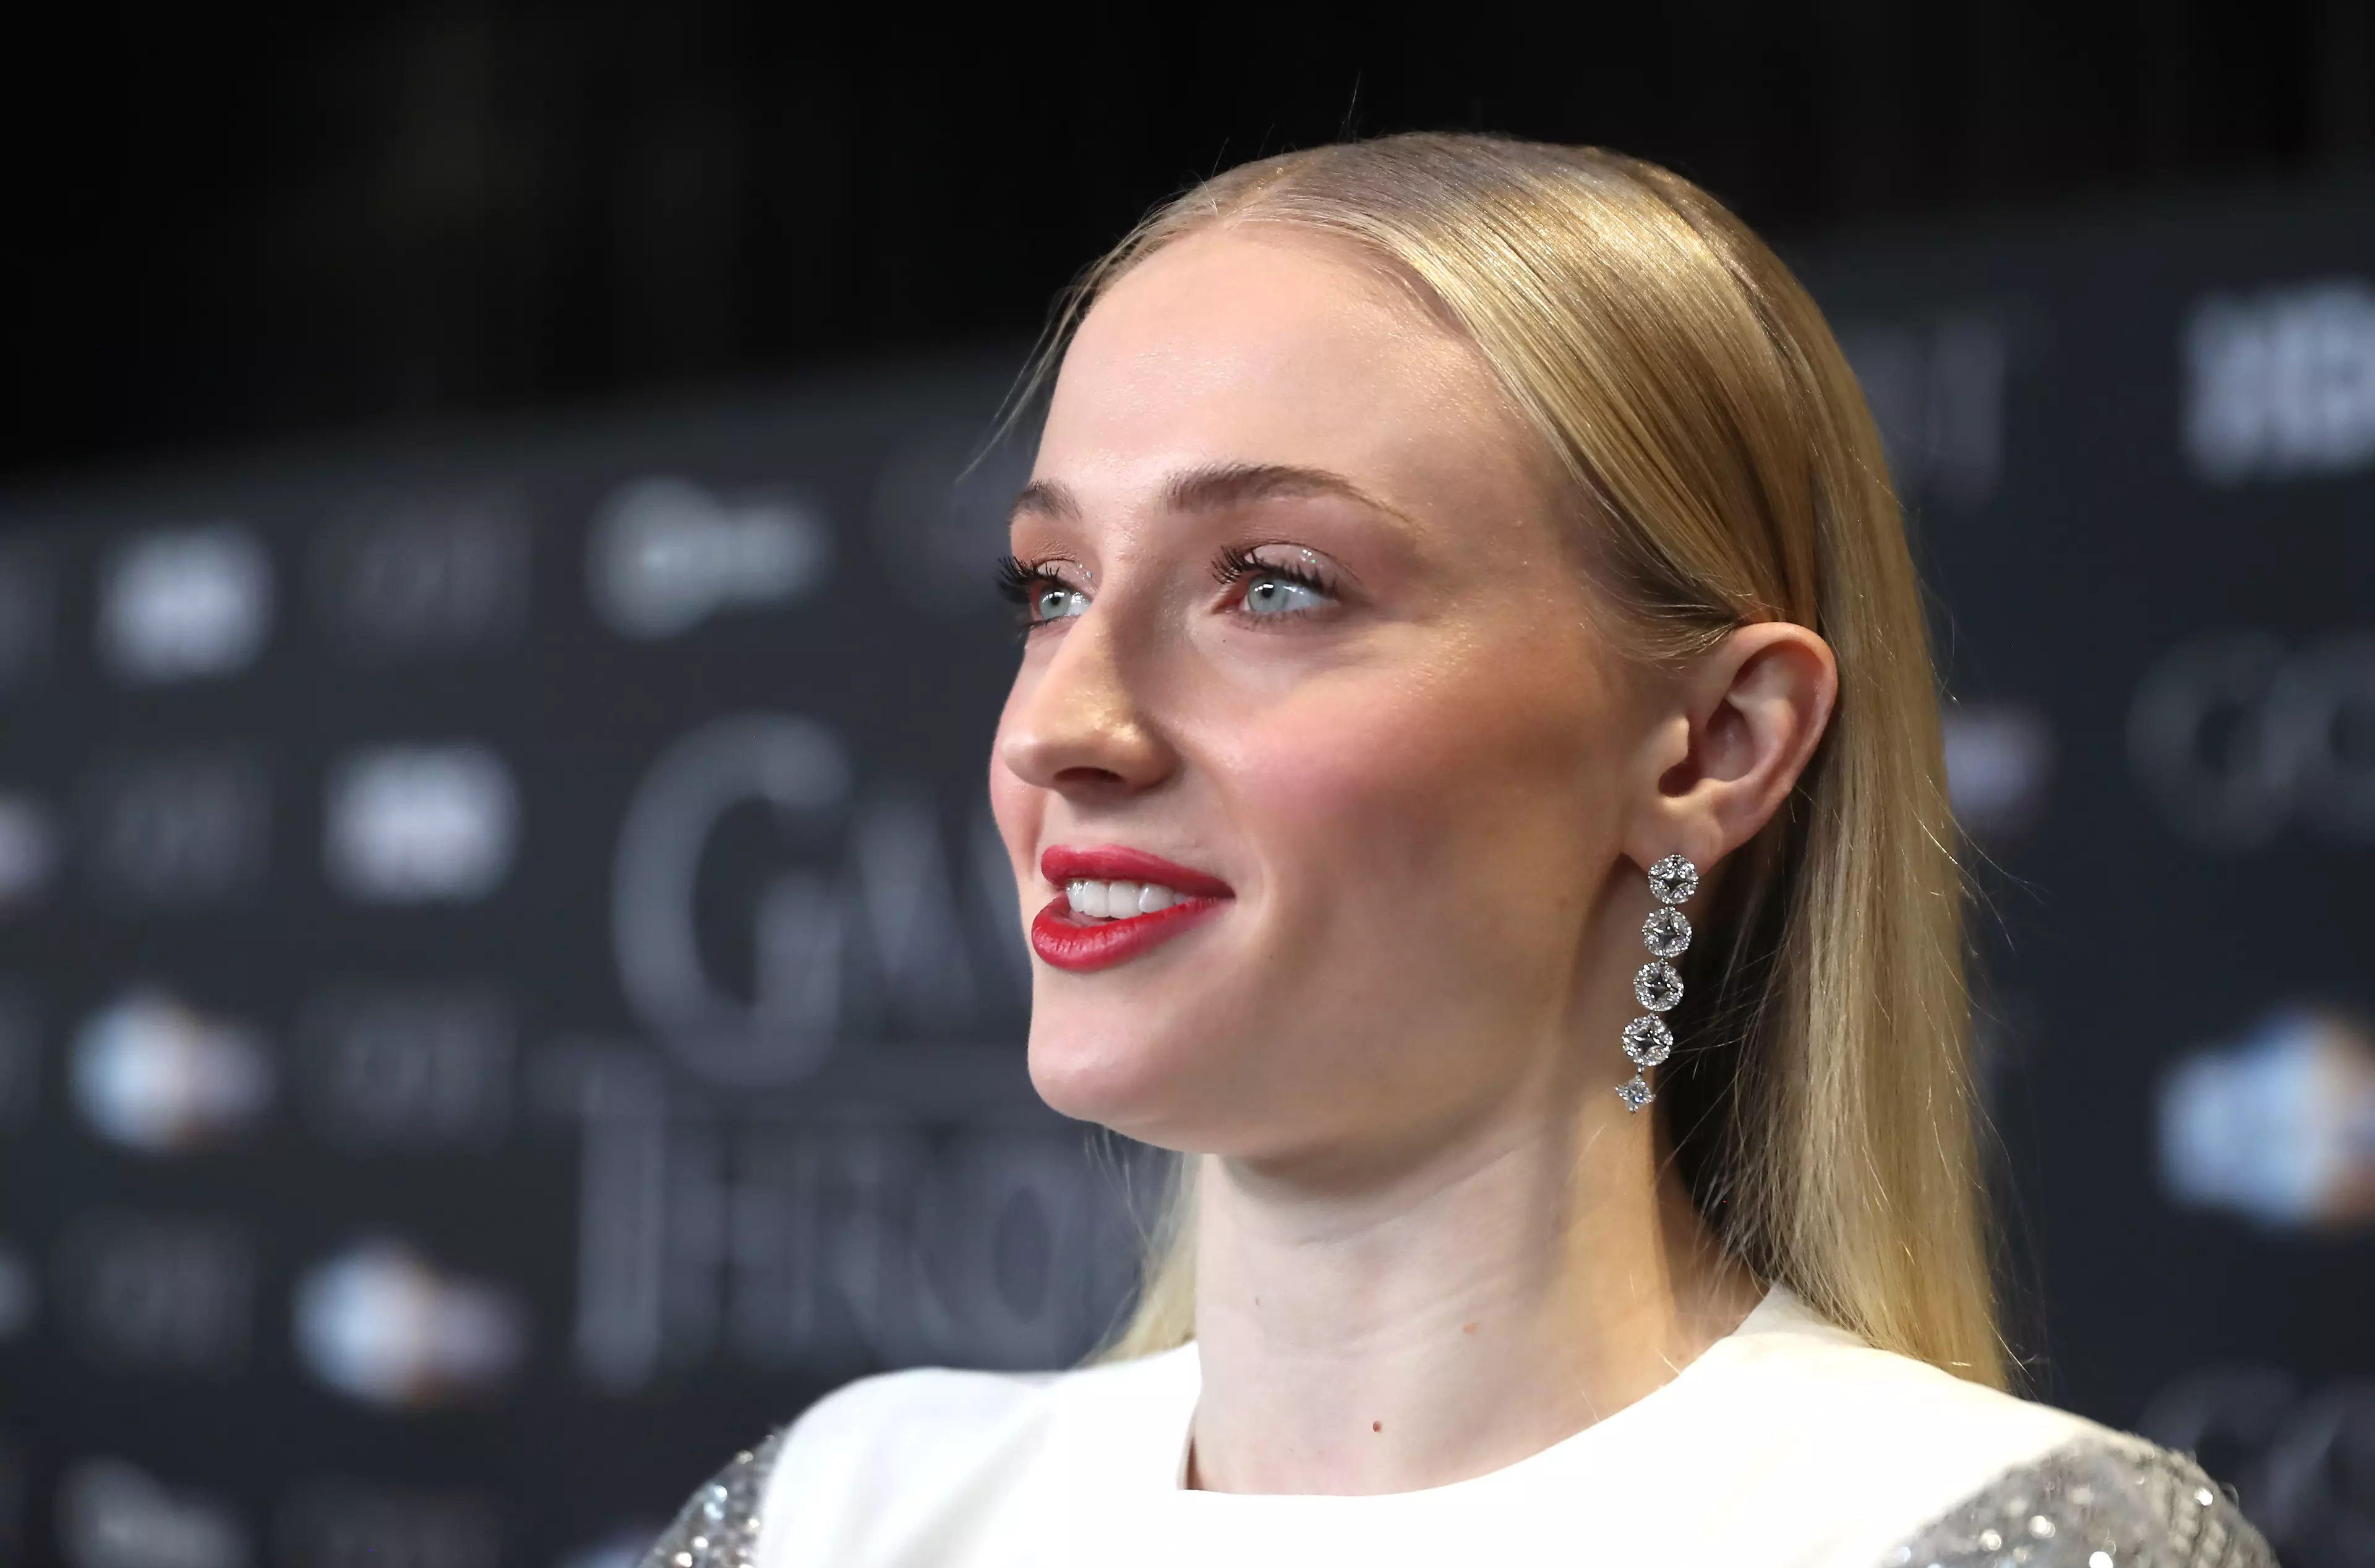 Sophie Turner at the Game of Thrones premiere in Belfast.